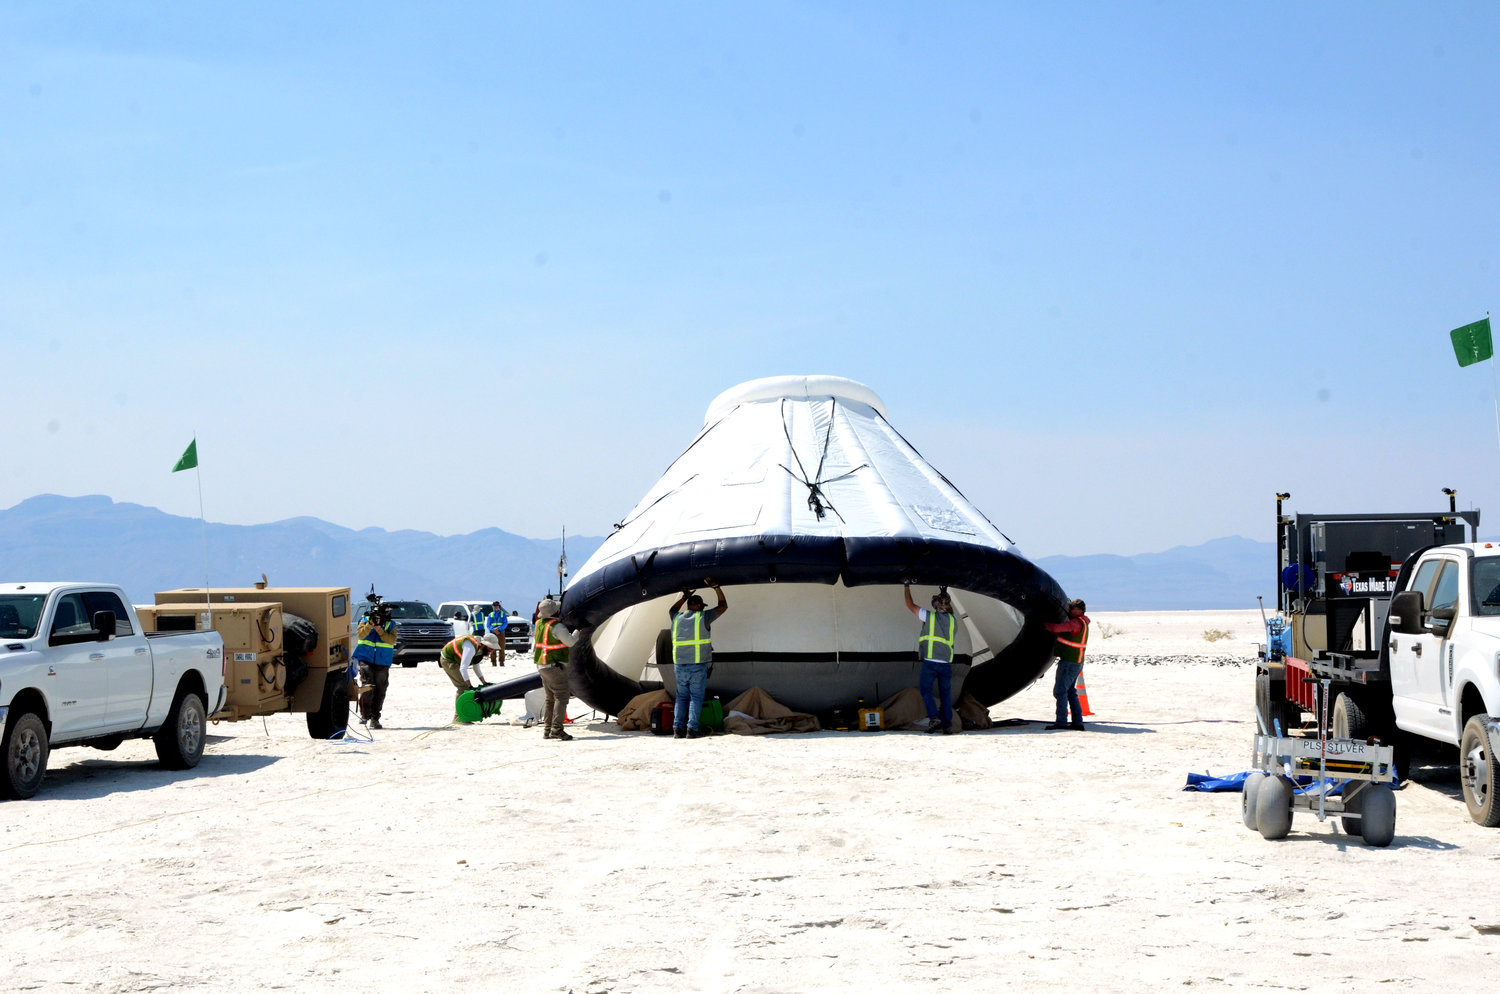 White Sands Missile Range personnel supporting NASA and
Boeing's Orbital Flight Test-2 (OFT-2) landing and recovery of the Starliner spacecraft participated in a Mission Dress Rehearsal on May 18, 2022 at White Sands Space Harbor.